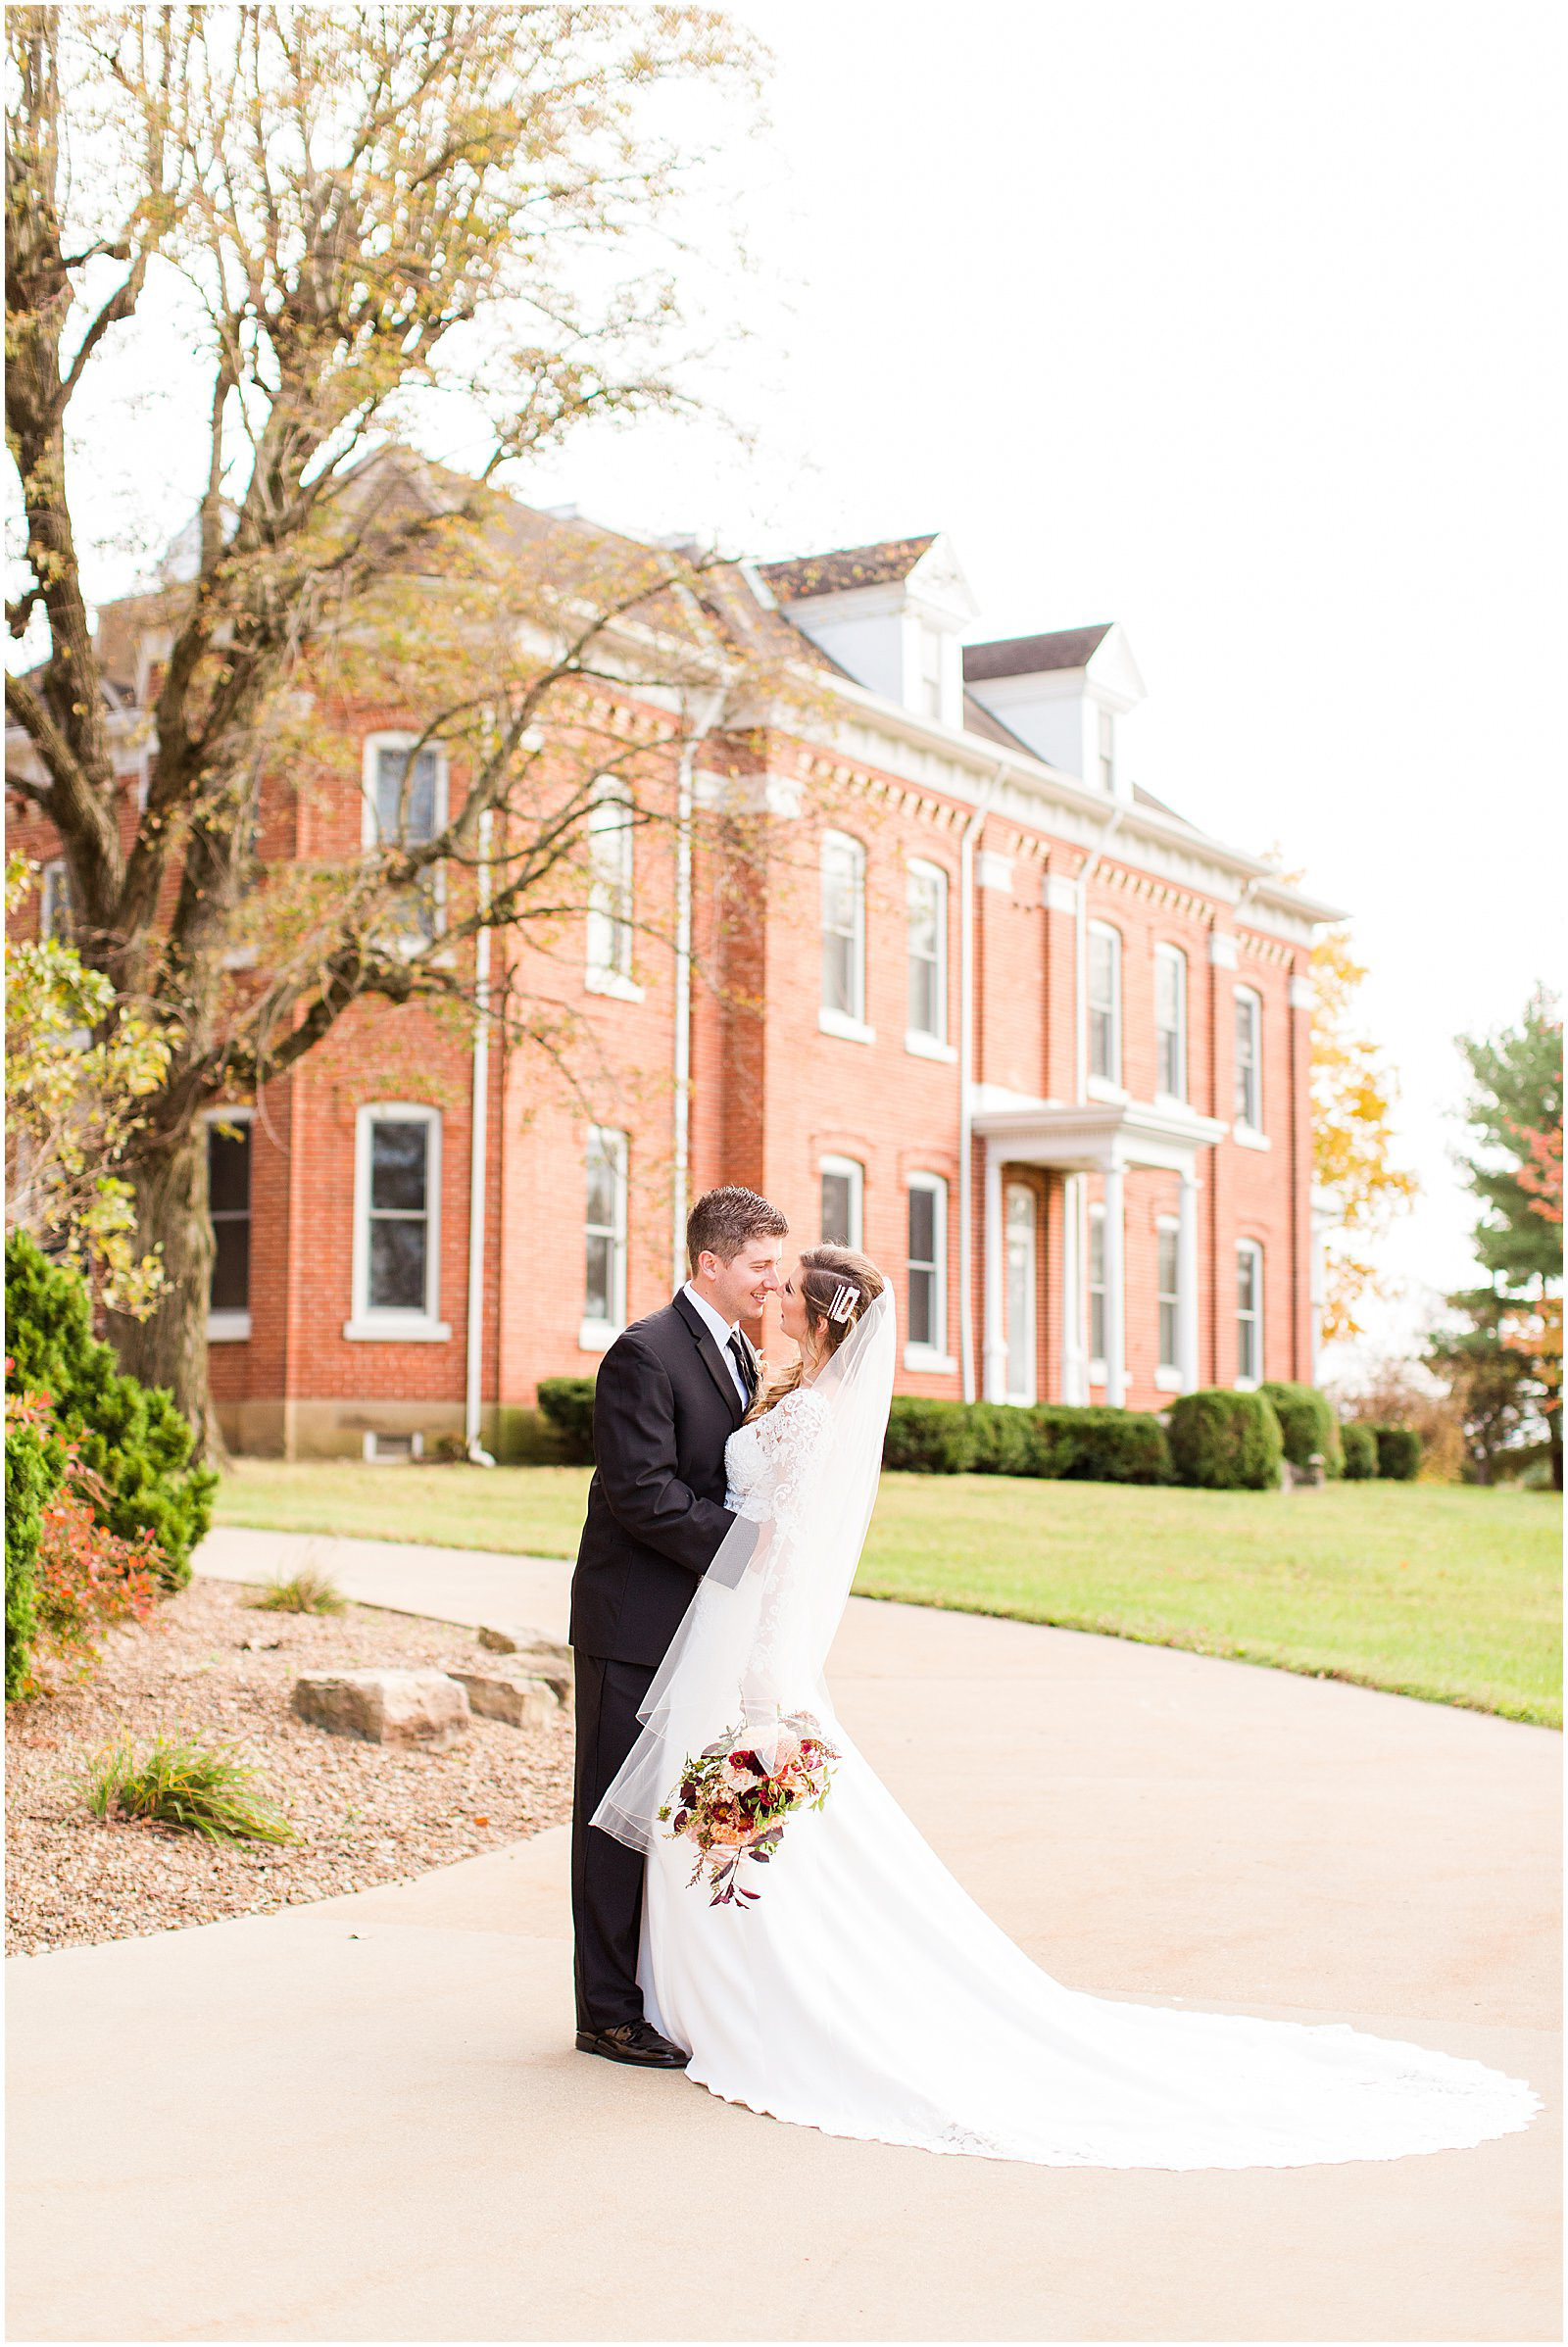 A Romantic Fall Wedding in Ferdinand, IN | Tori and Kyle | Bret and Brandie Photography 0116.jpg